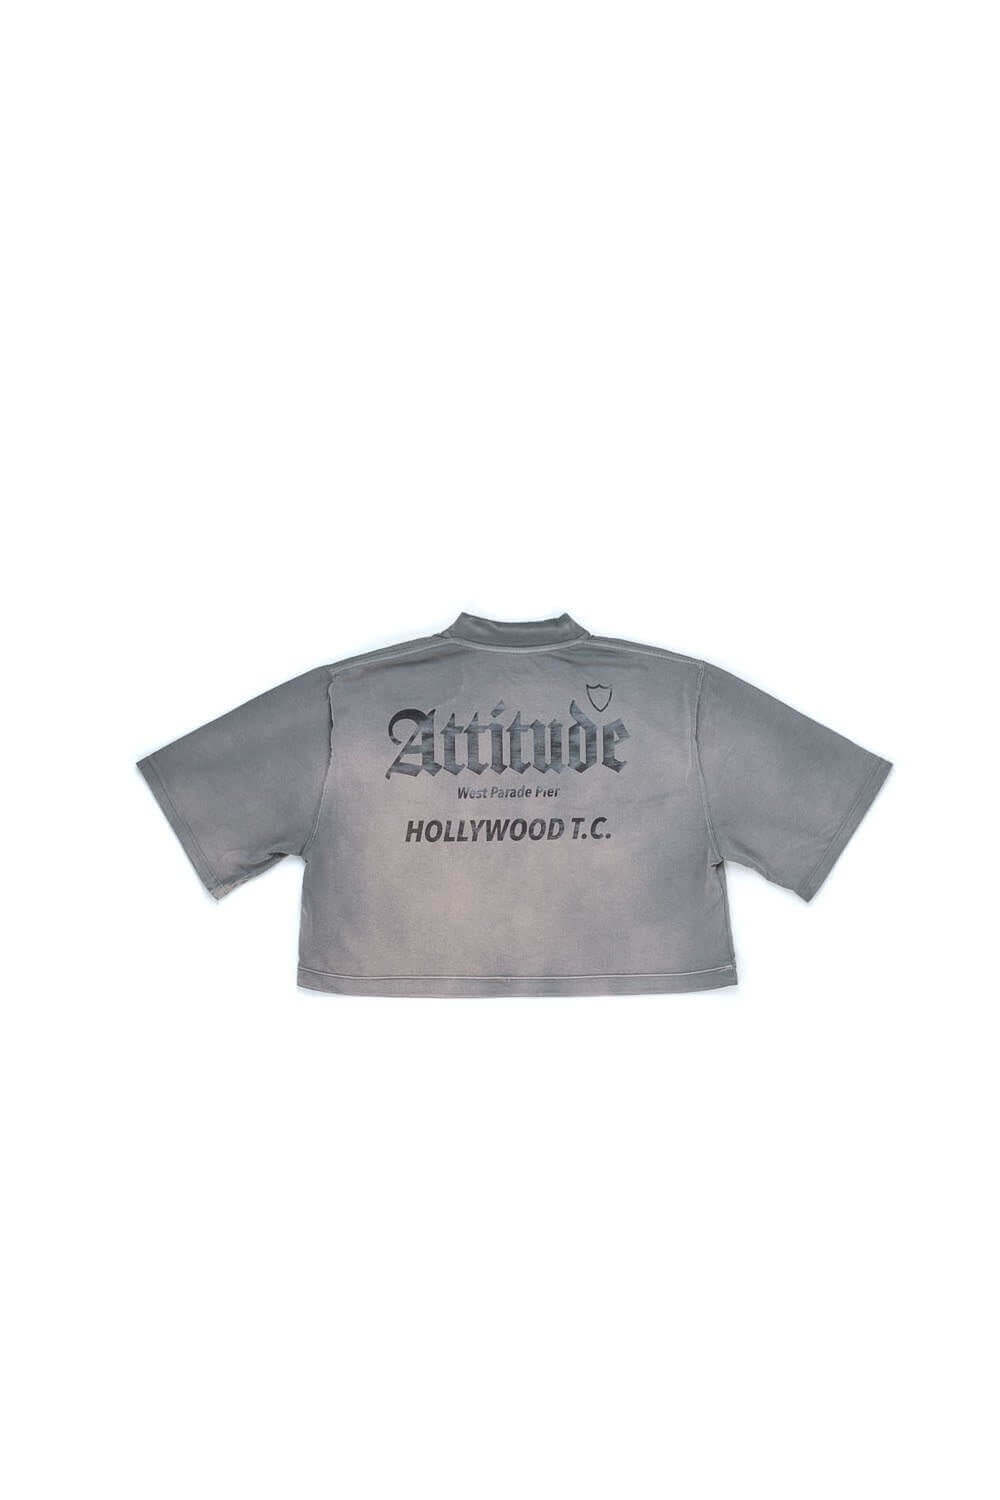 ATTITUDE CROP W. T-SHIRT Crop fit t-shirt with printed mini-shield logo on the front. Composition: 100% Cotton HTC LOS ANGELES